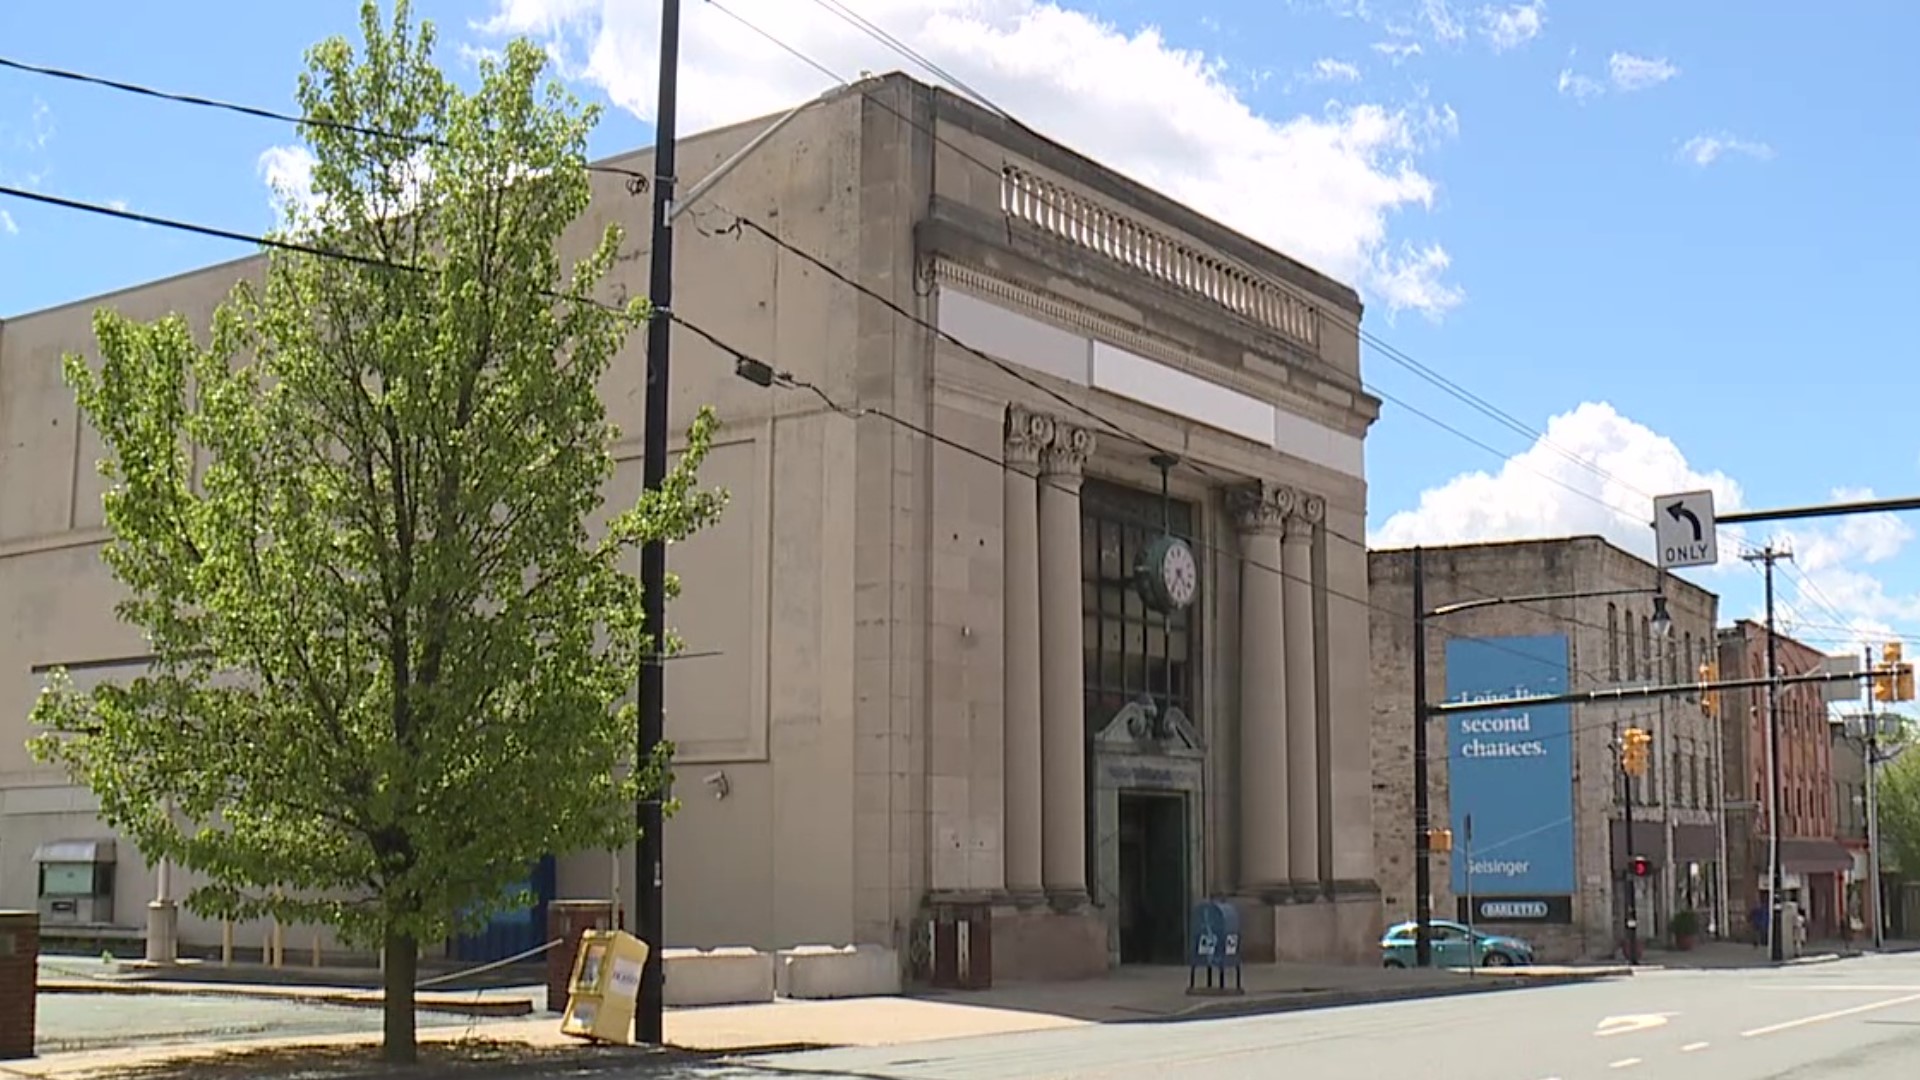 A former bank along one of Scranton's busiest streets is set to become a center for arts and culture.